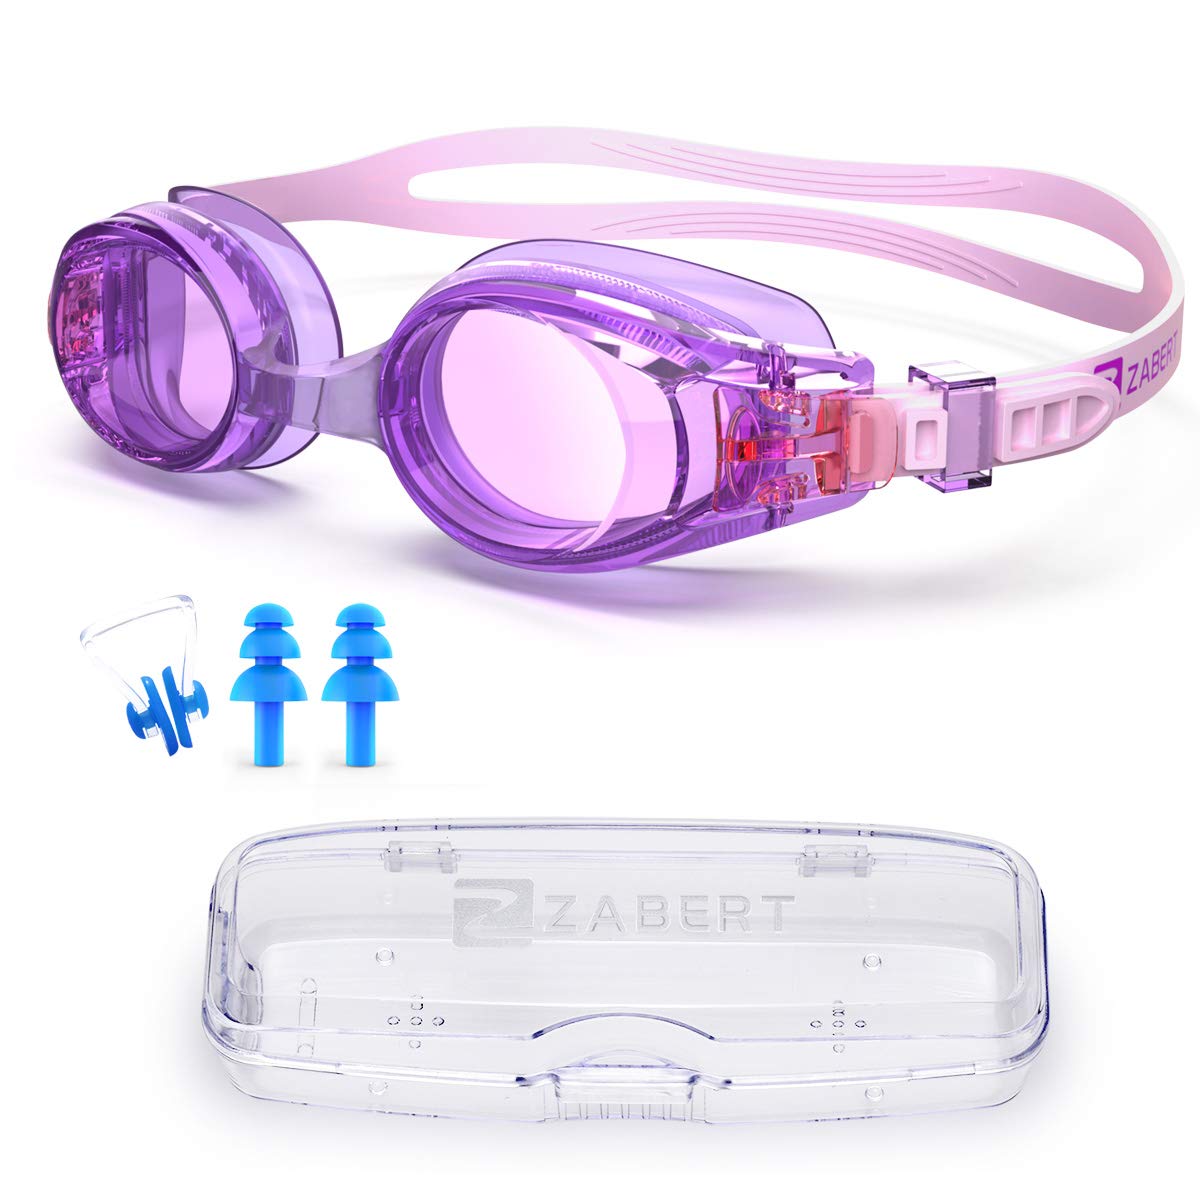 ZABERT KX Baby Toddlers Swim GogglesSwimming Goggles for Age 0-5 Years Old